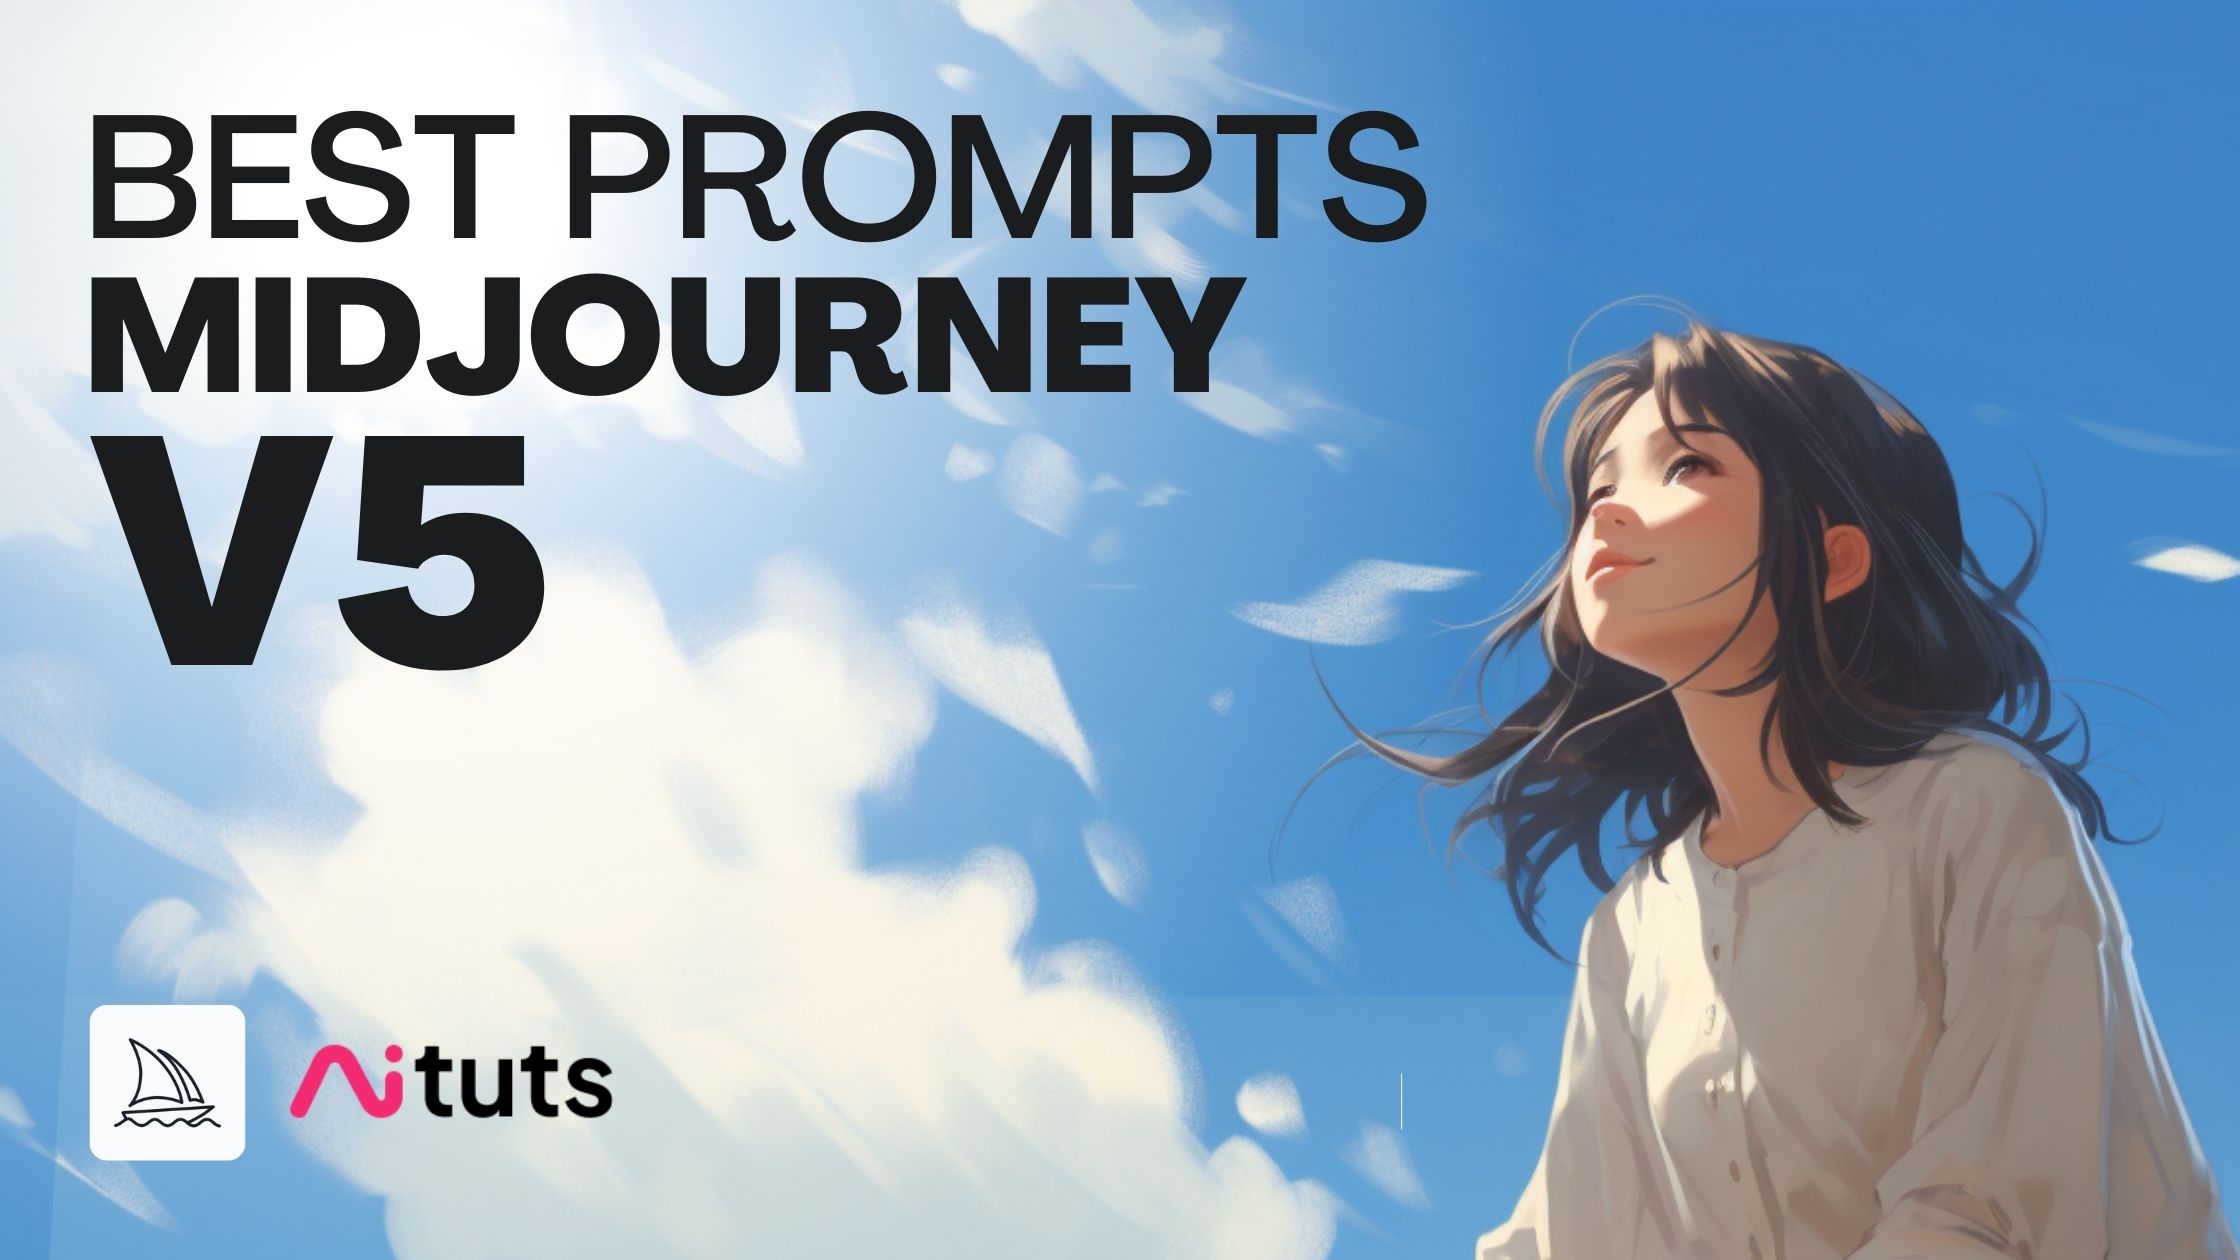 Best Prompts for Midjourney V5 (many styles & applications) - AiTuts